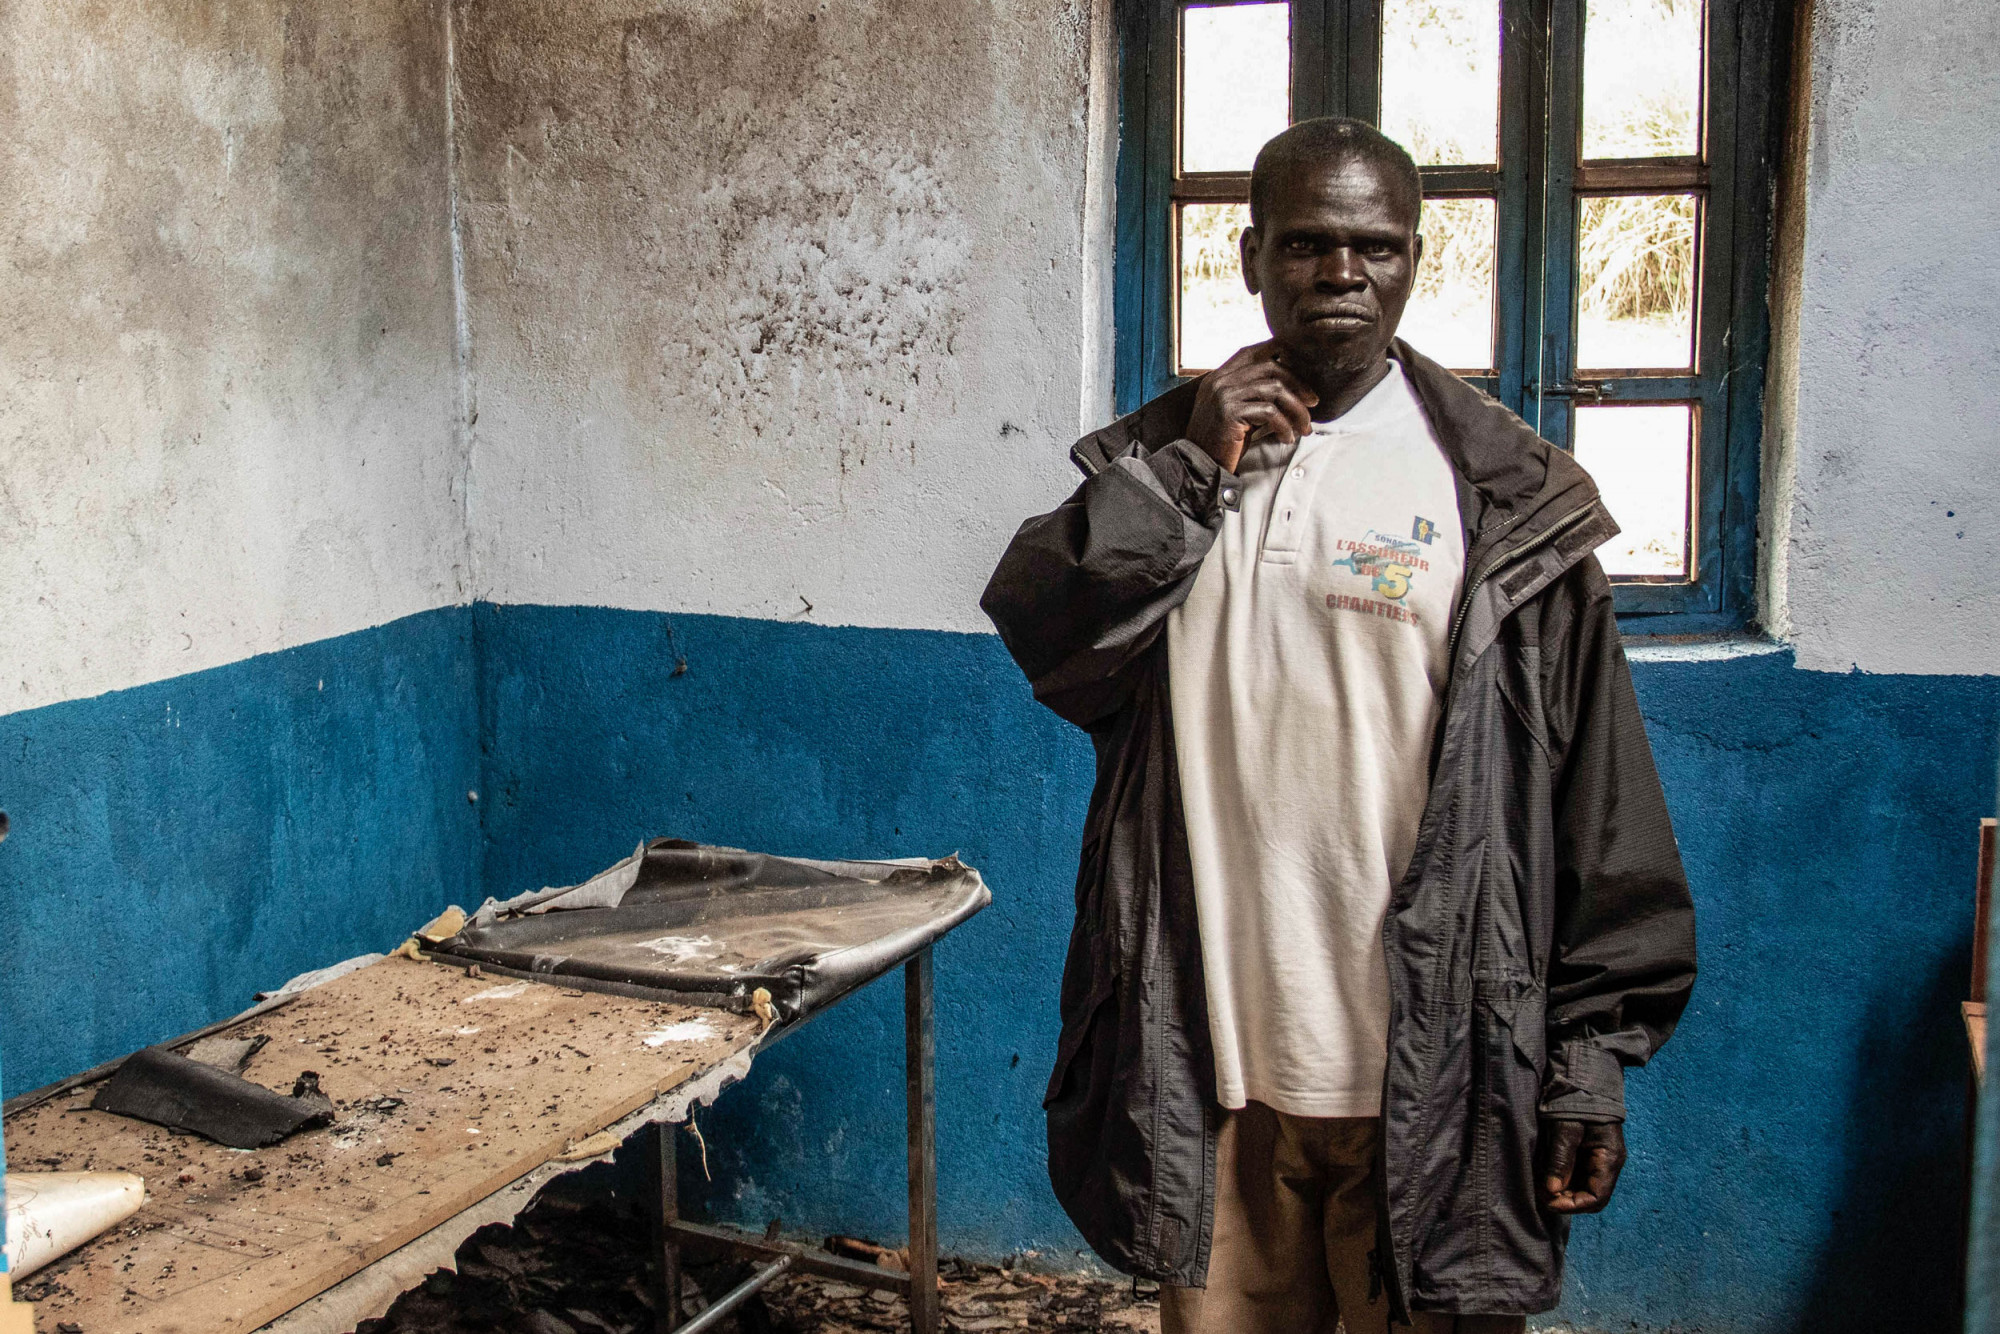 Tche, DRC, February 2020. A village chief stands in the destroyed health clinic in the village of Tche in Ituri province in February. A series of massacres in villages in Djugu territory, including Tche, killed 161 people in early June 2019 and killings in the area have continued in 2020. Hospitals and health clinics have been destroyed and burned during the ongoing conflict between the Hema and Lendu ethnic groups in the area. © Dieudonne Dirole for Fondation Carmignac